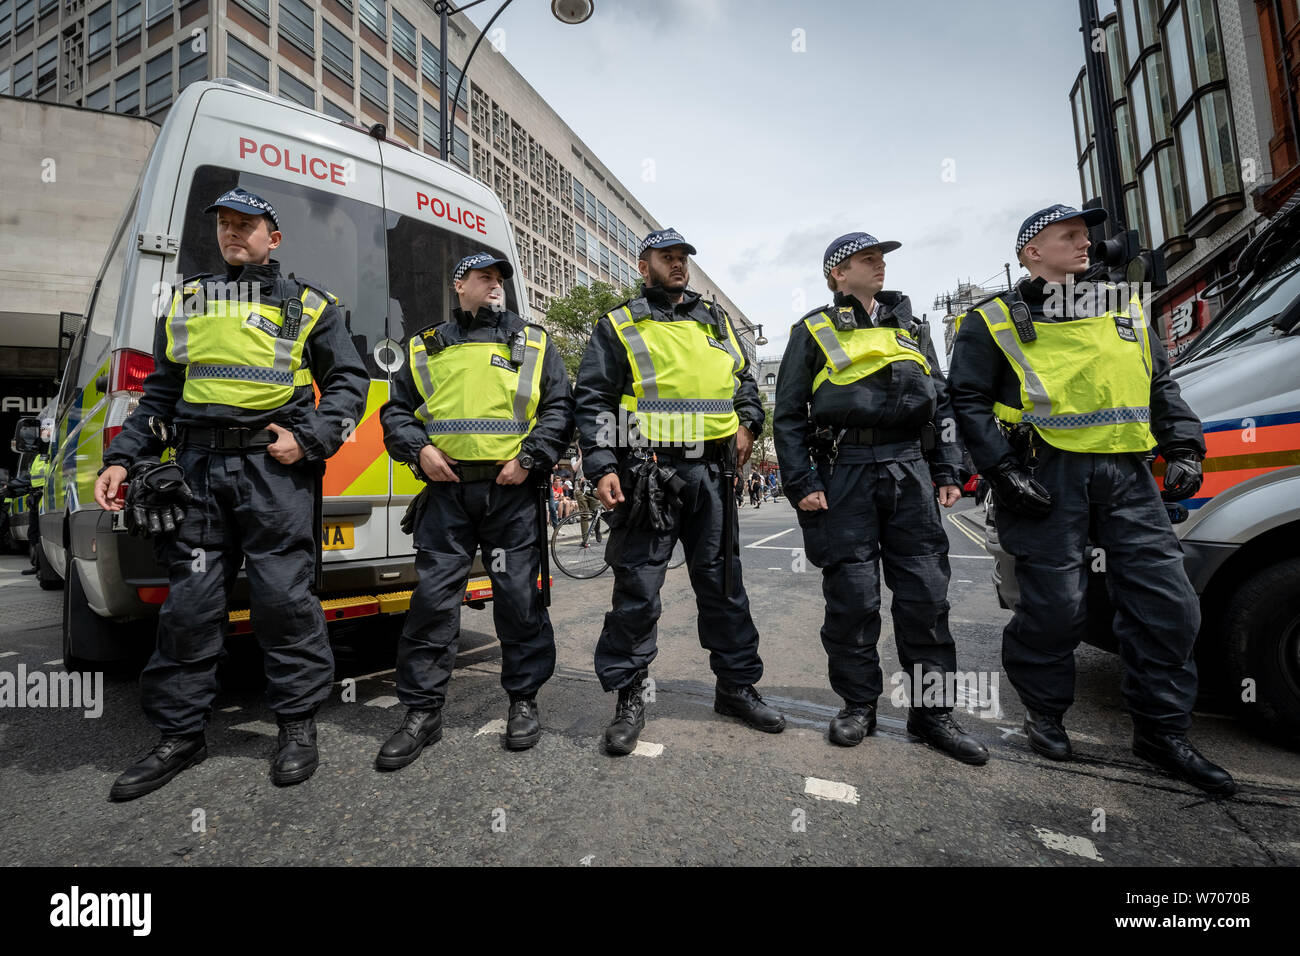 London, UK. 3rd August, 2019. Anti-fascists clash with police whilst counter-protesting the 'Free Tommy Robinson' demonstration. Police arrest twenty four during a mass demonstration in support of the jailed Tommy Robinson, real name Stephen Yaxley-Lennon, who was sentenced last month to nine months in prison after being found guilty in contempt of court. Counter-protesters including antifascist activists and the anti-racist group: Stand Up to Racism, opposed the pro-Robinson demonstrators with protest groups kept apart by met police. Credit: Guy Corbishley/Alamy Live News Stock Photo